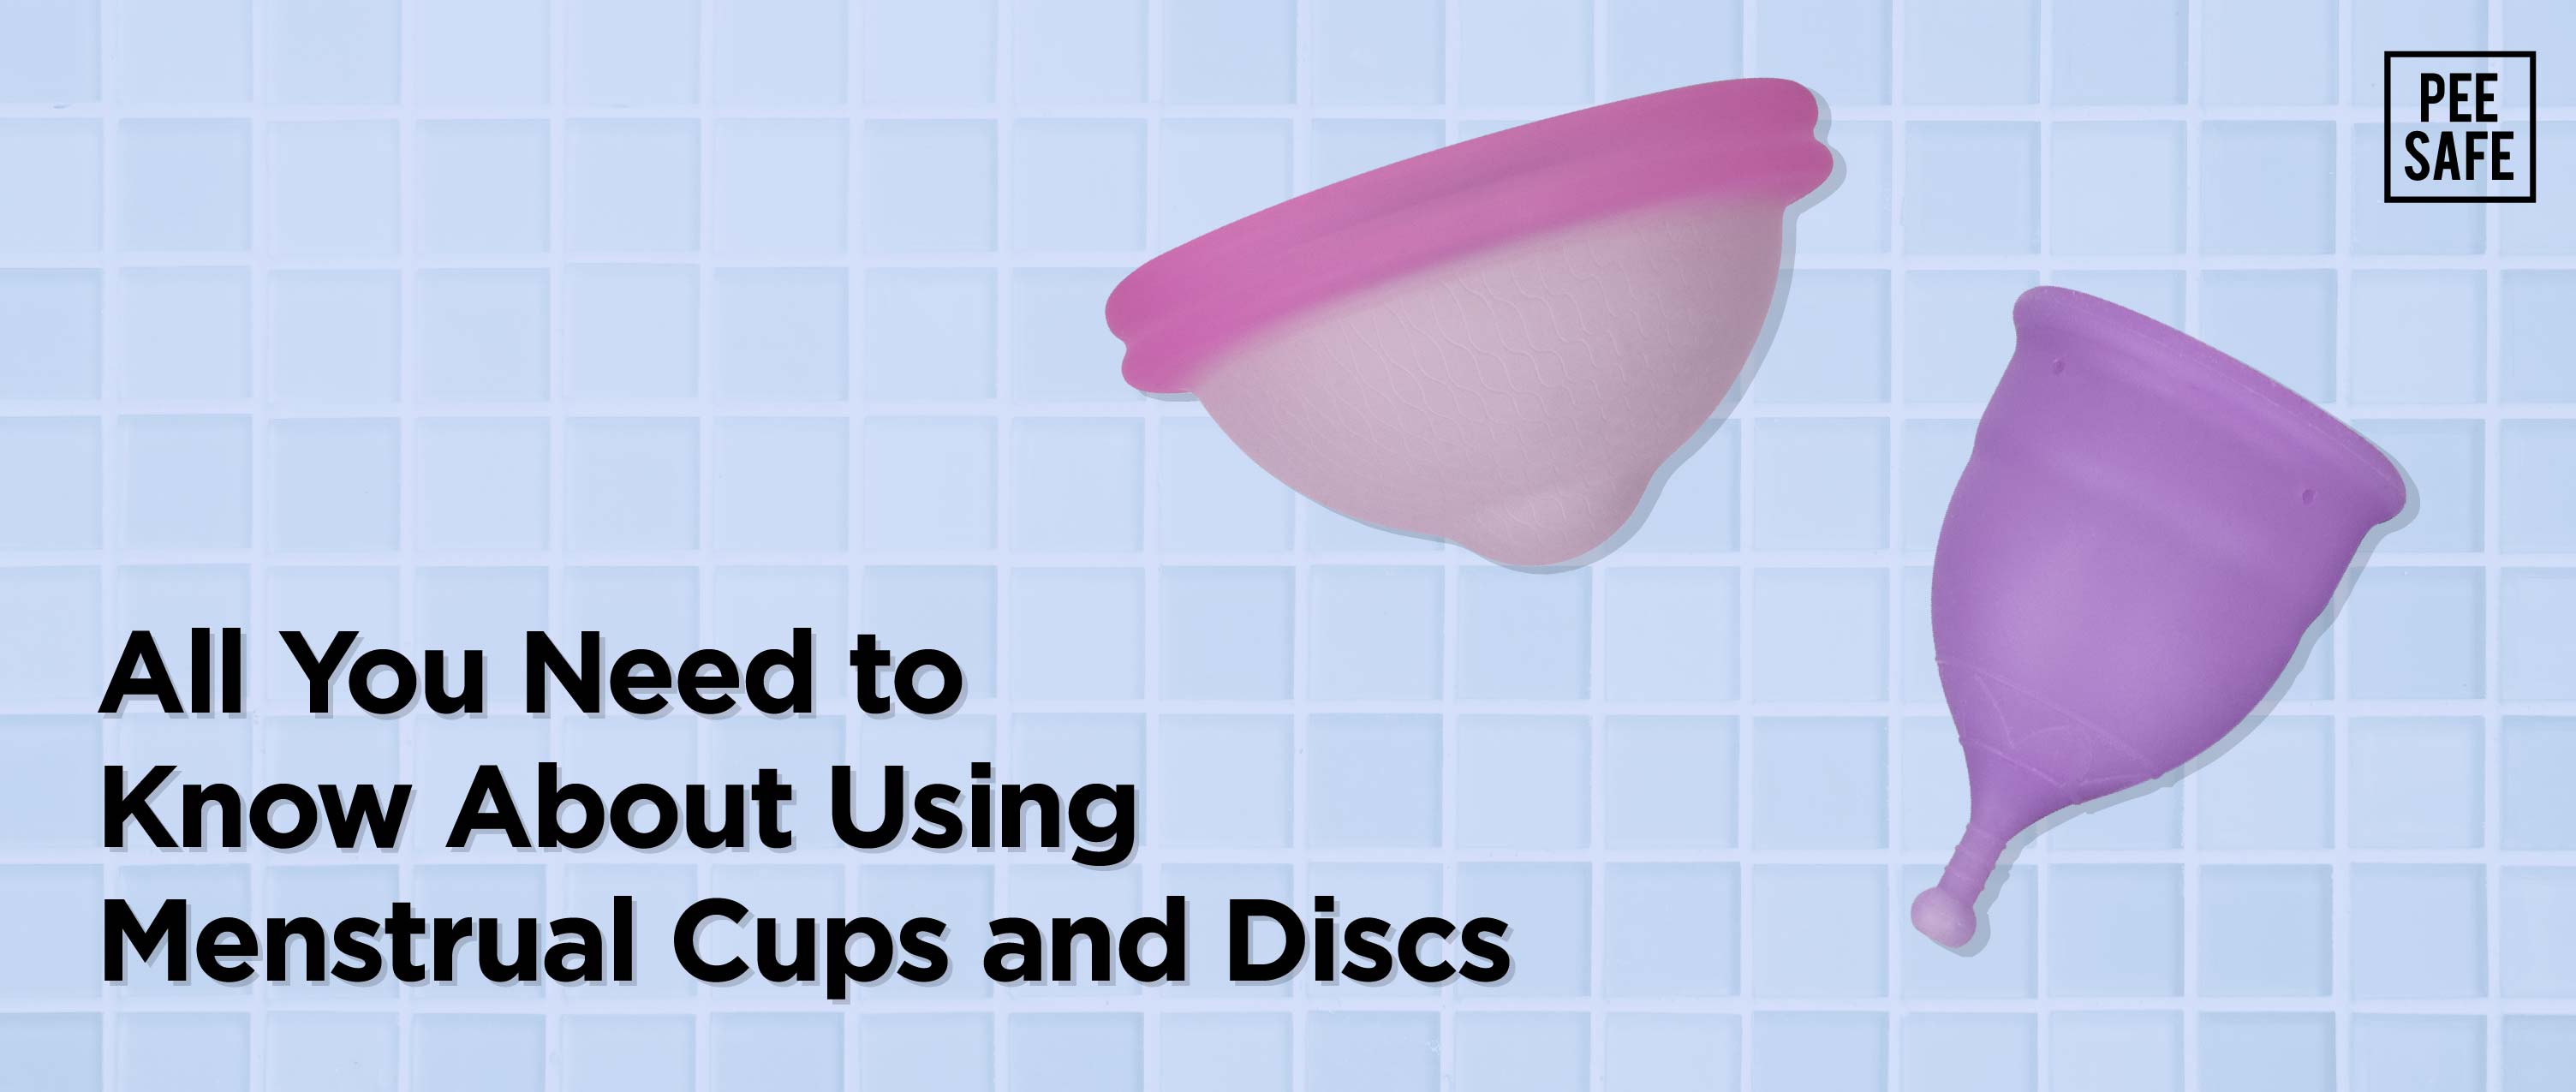  All You Need to Know About Using Menstrual Cups and Discs